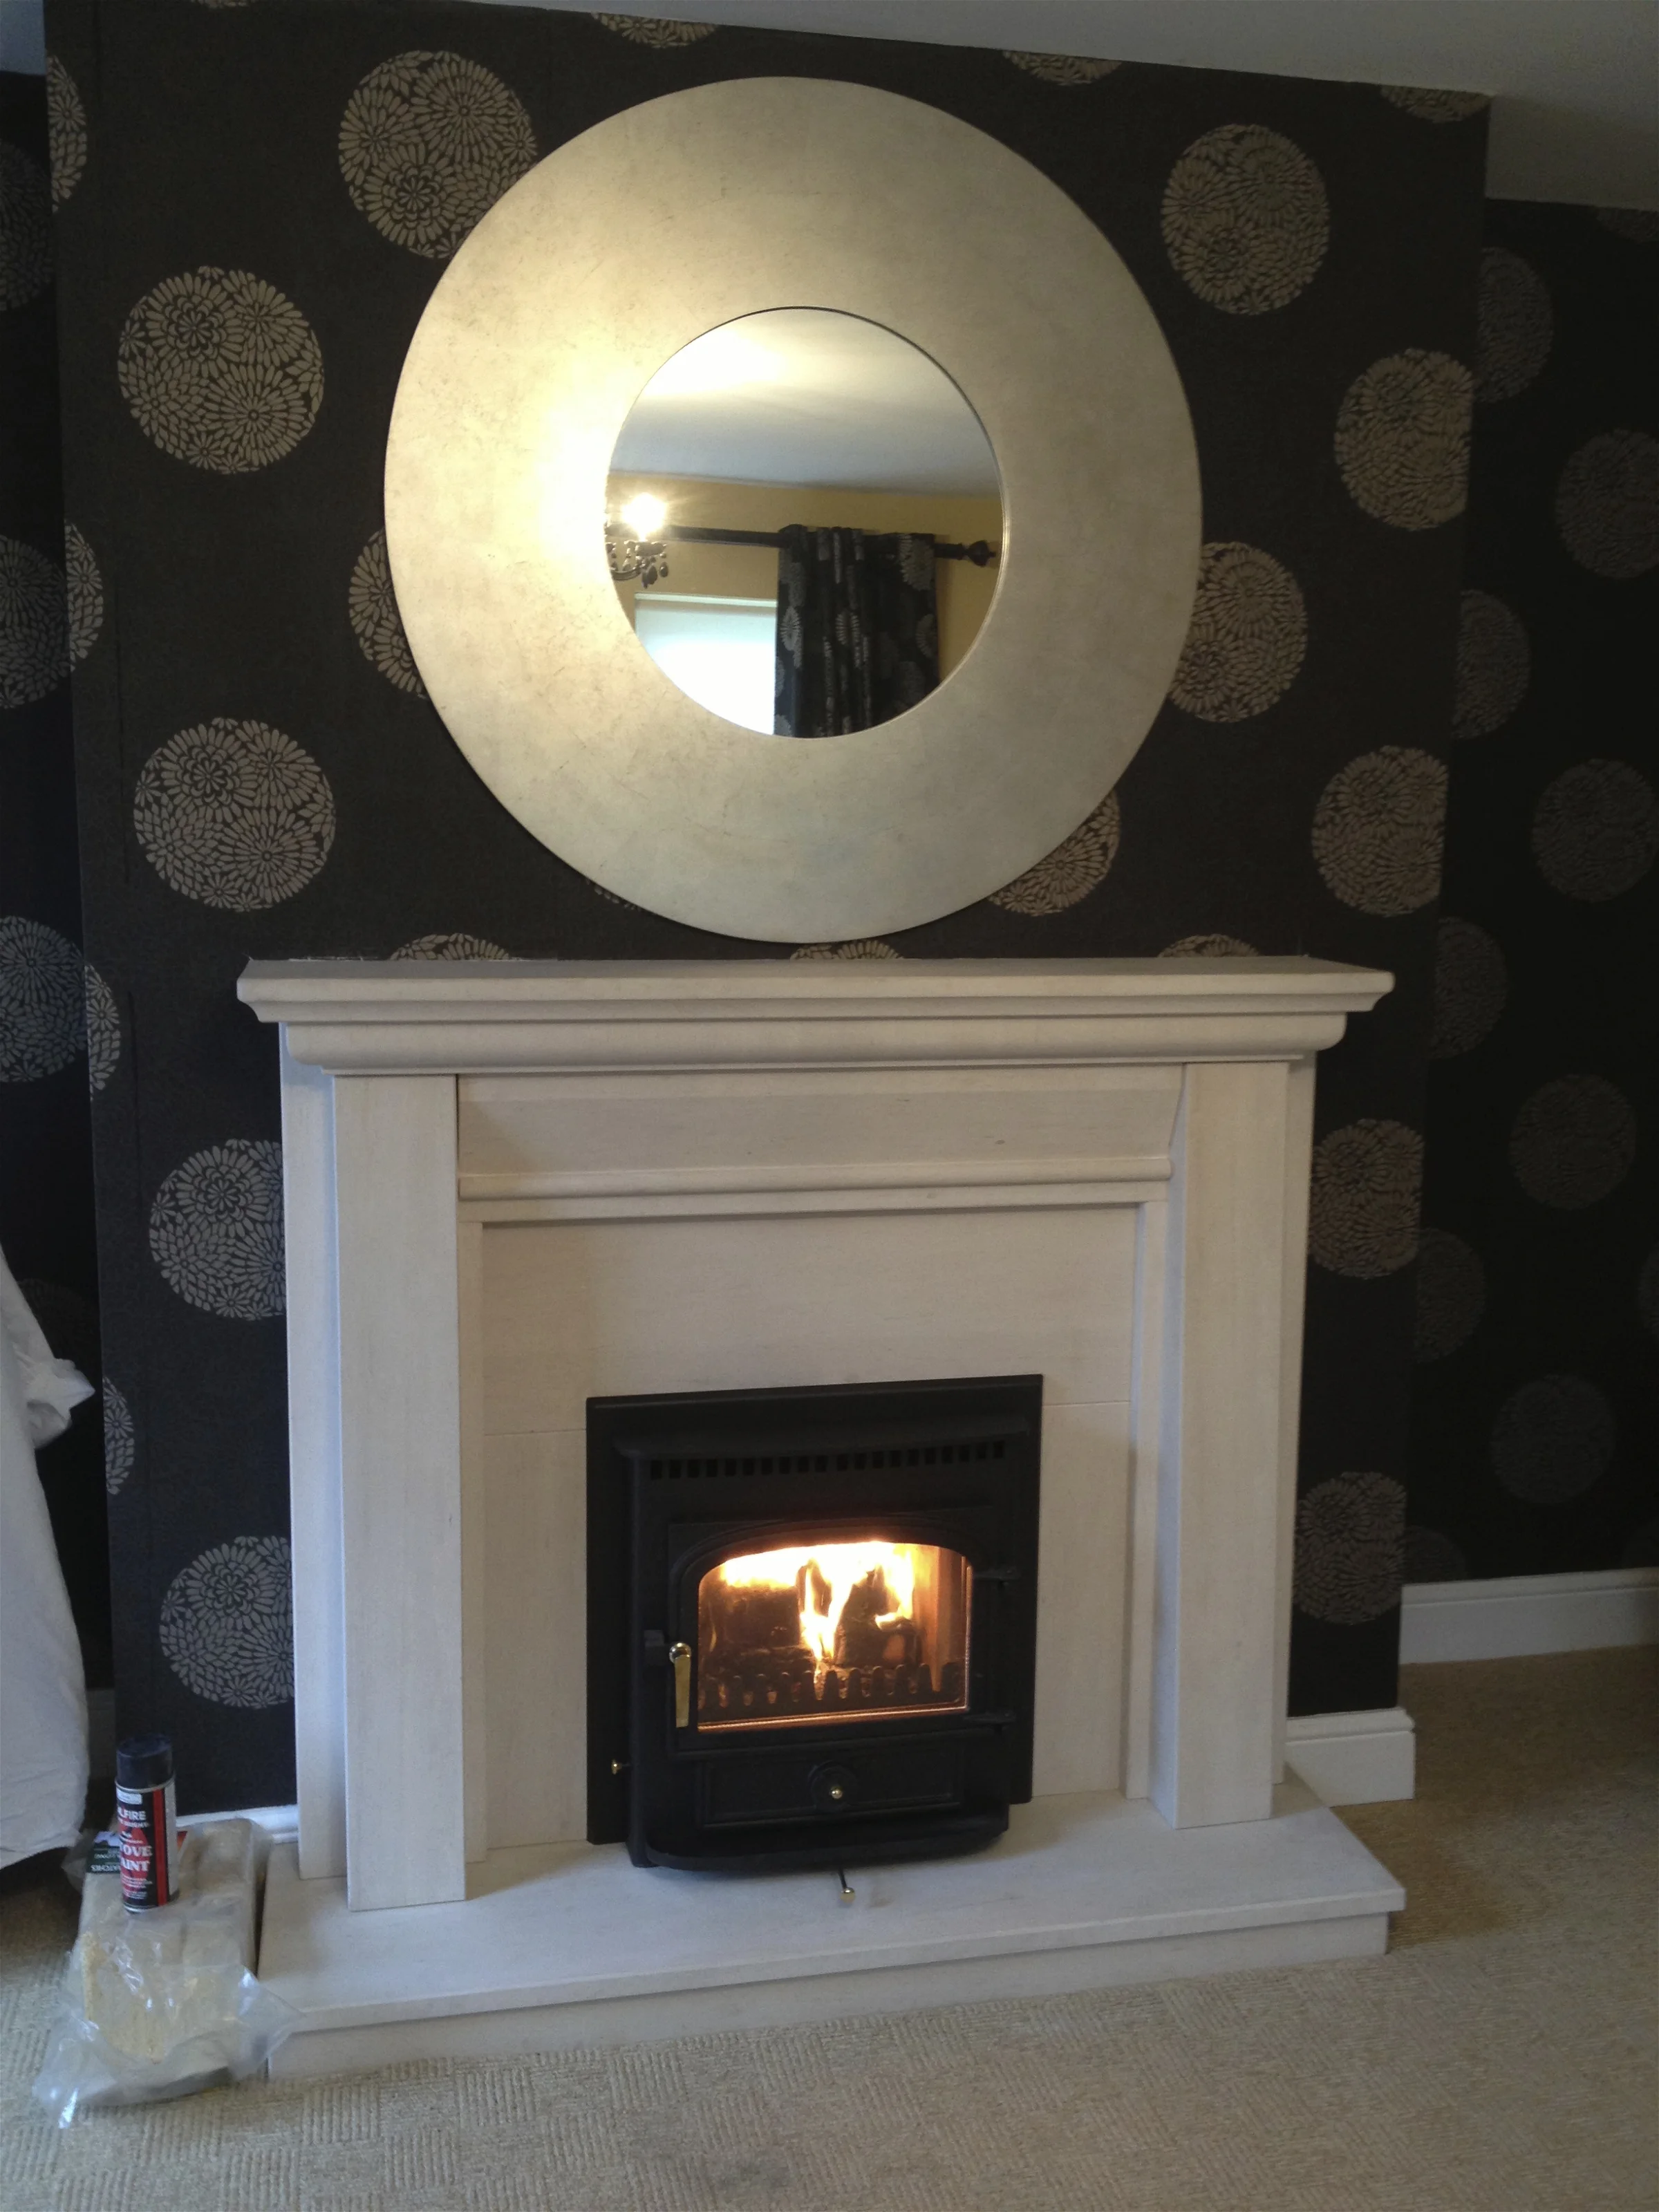 Inset in fireplace